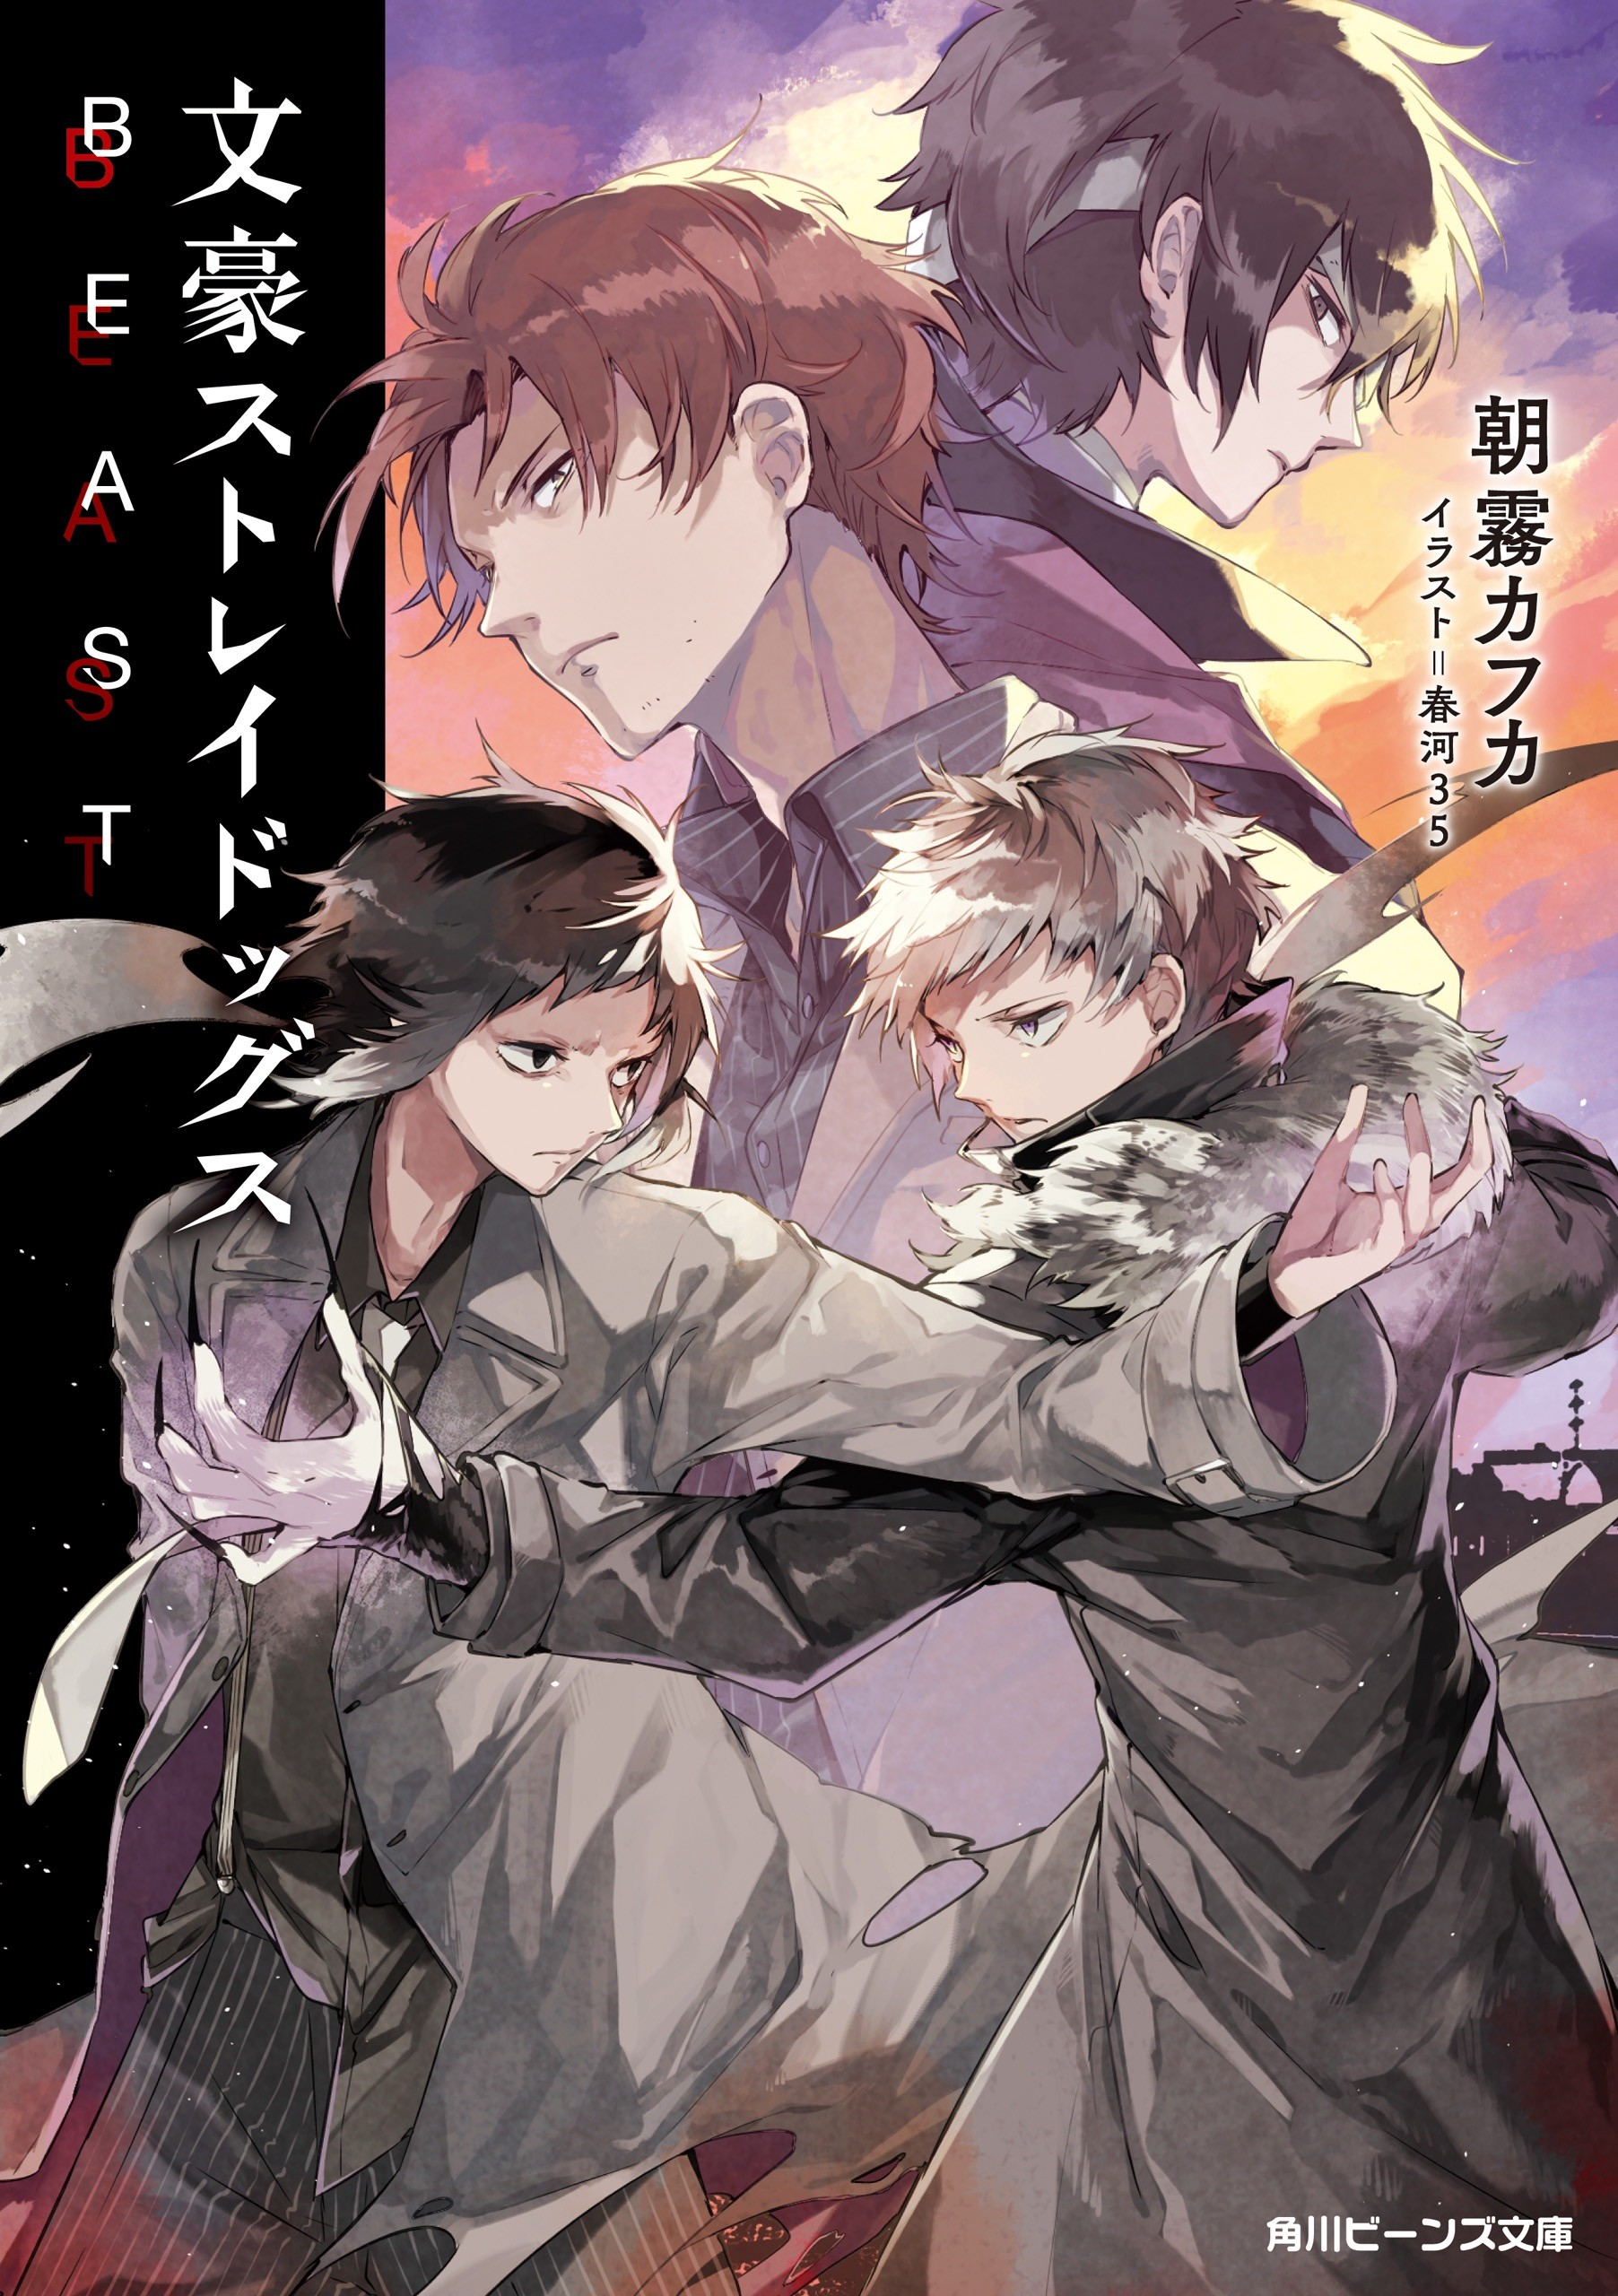 All Mixed Up In Bungo Stray Dogs: BEAST